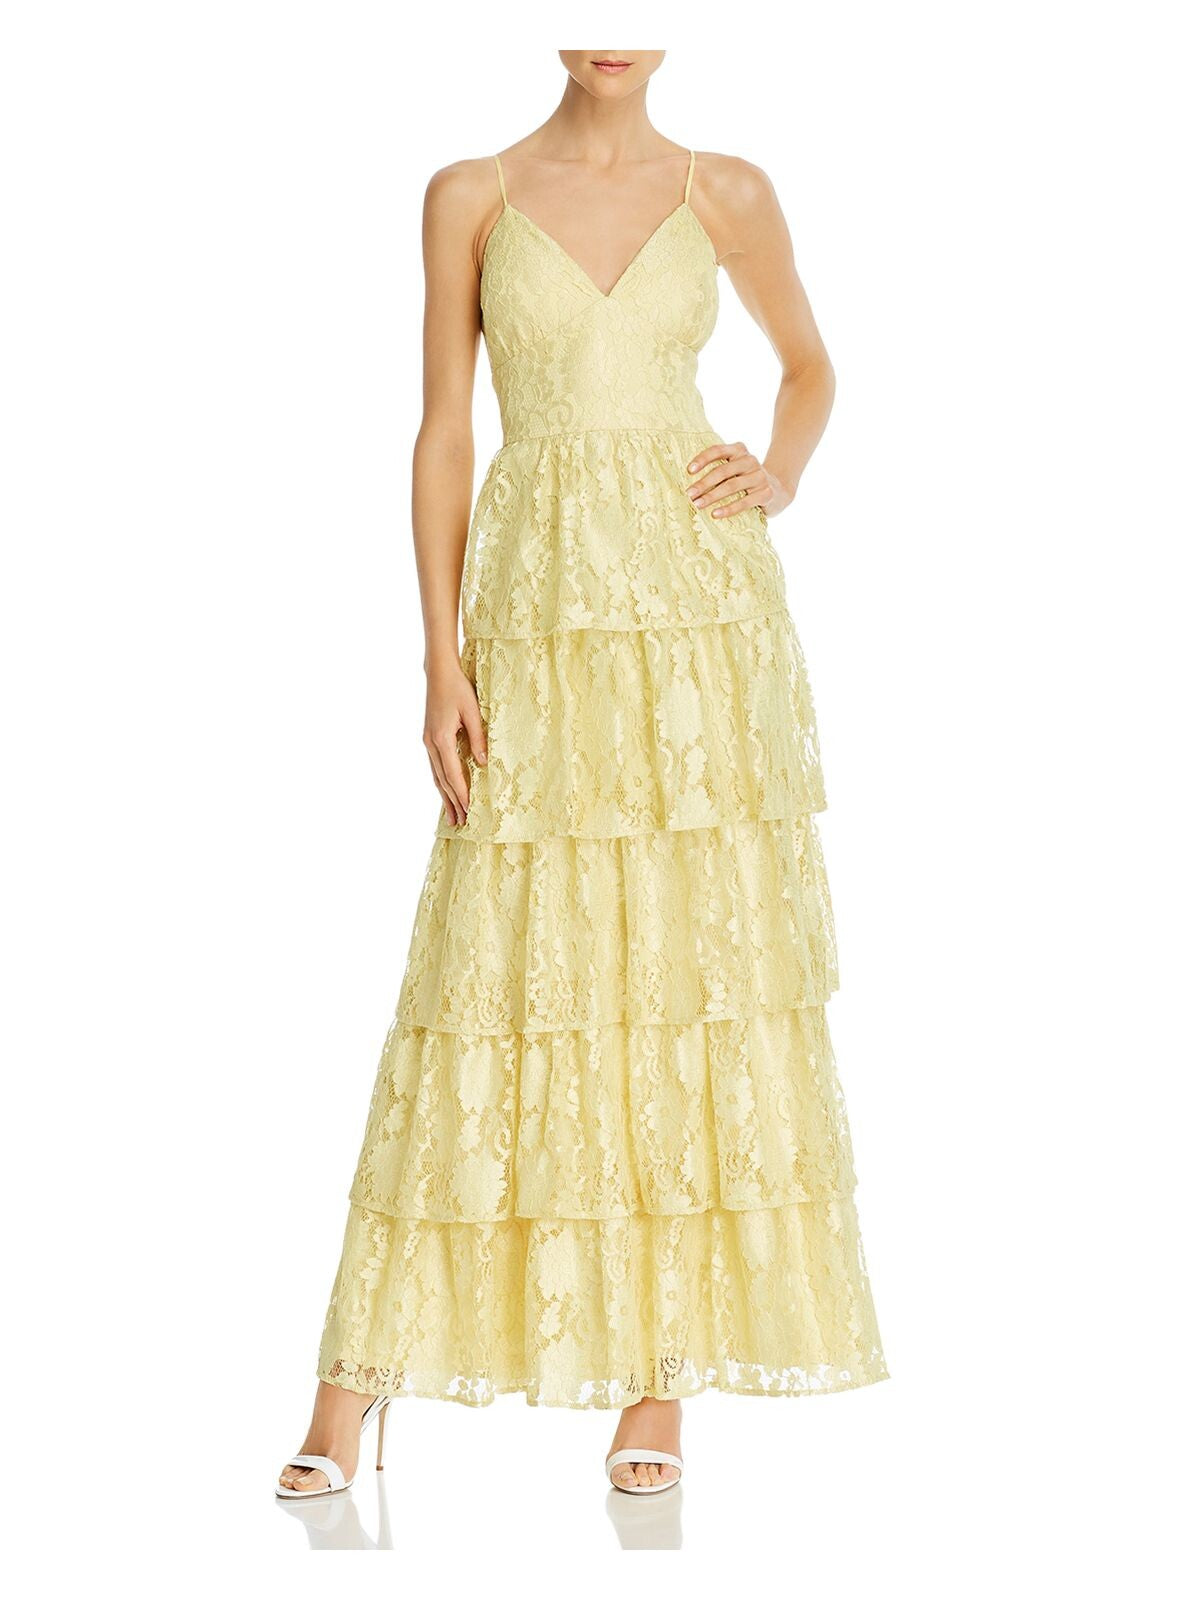 LAUNDRY BY SHELLI SEGAL Womens Yellow Lace Zippered Adjustable Straps Tiered Spaghetti Strap Sweetheart Neckline Full-Length Formal Gown Dress 4